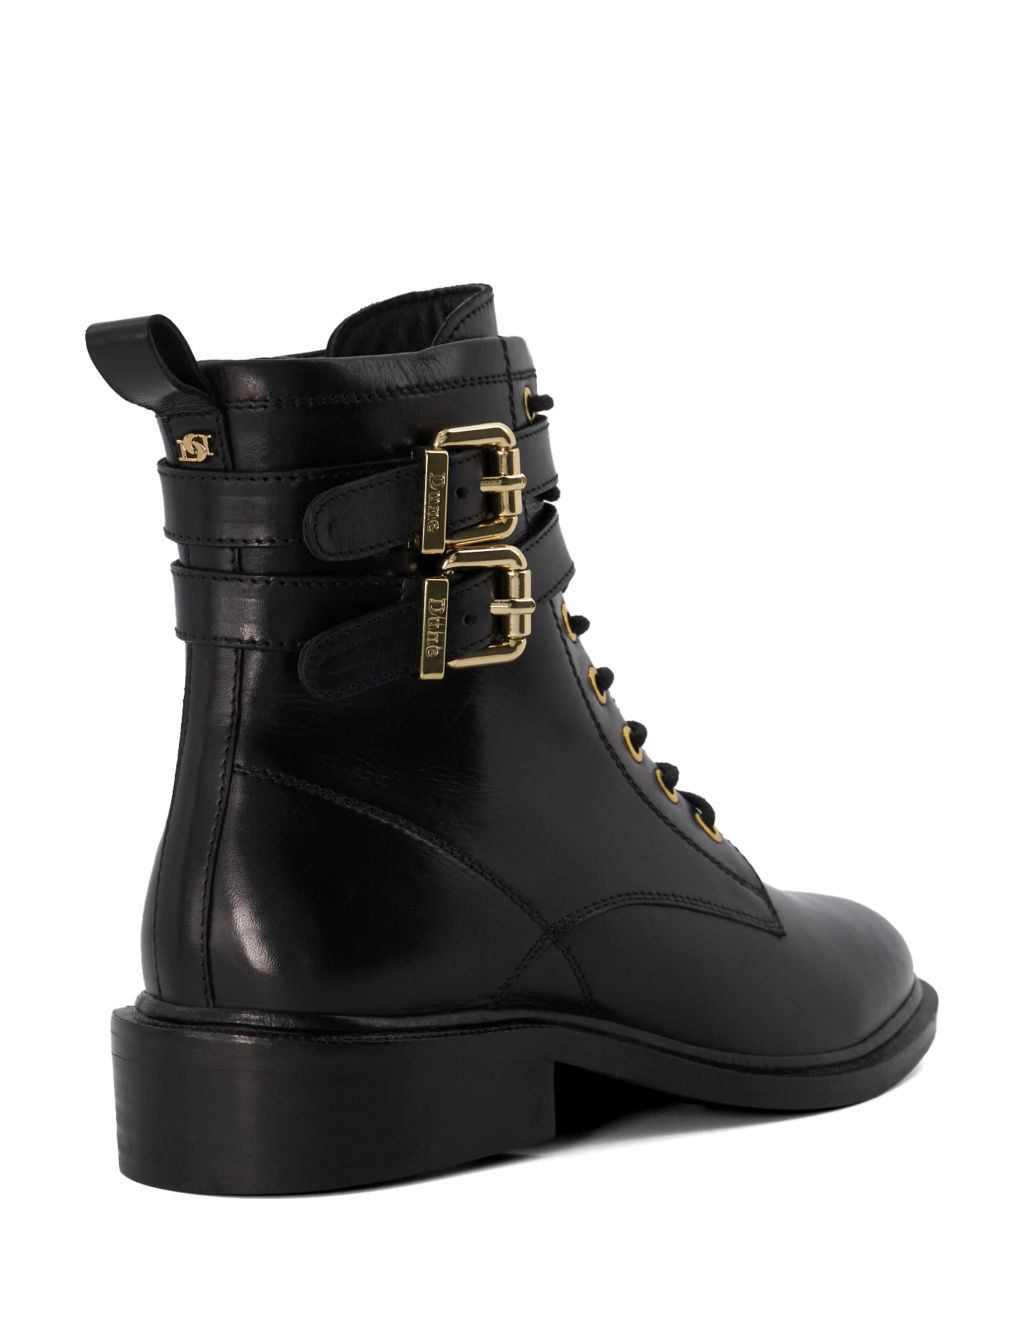 Leather Lace Up Buckle Flat Ankle Boots image 4